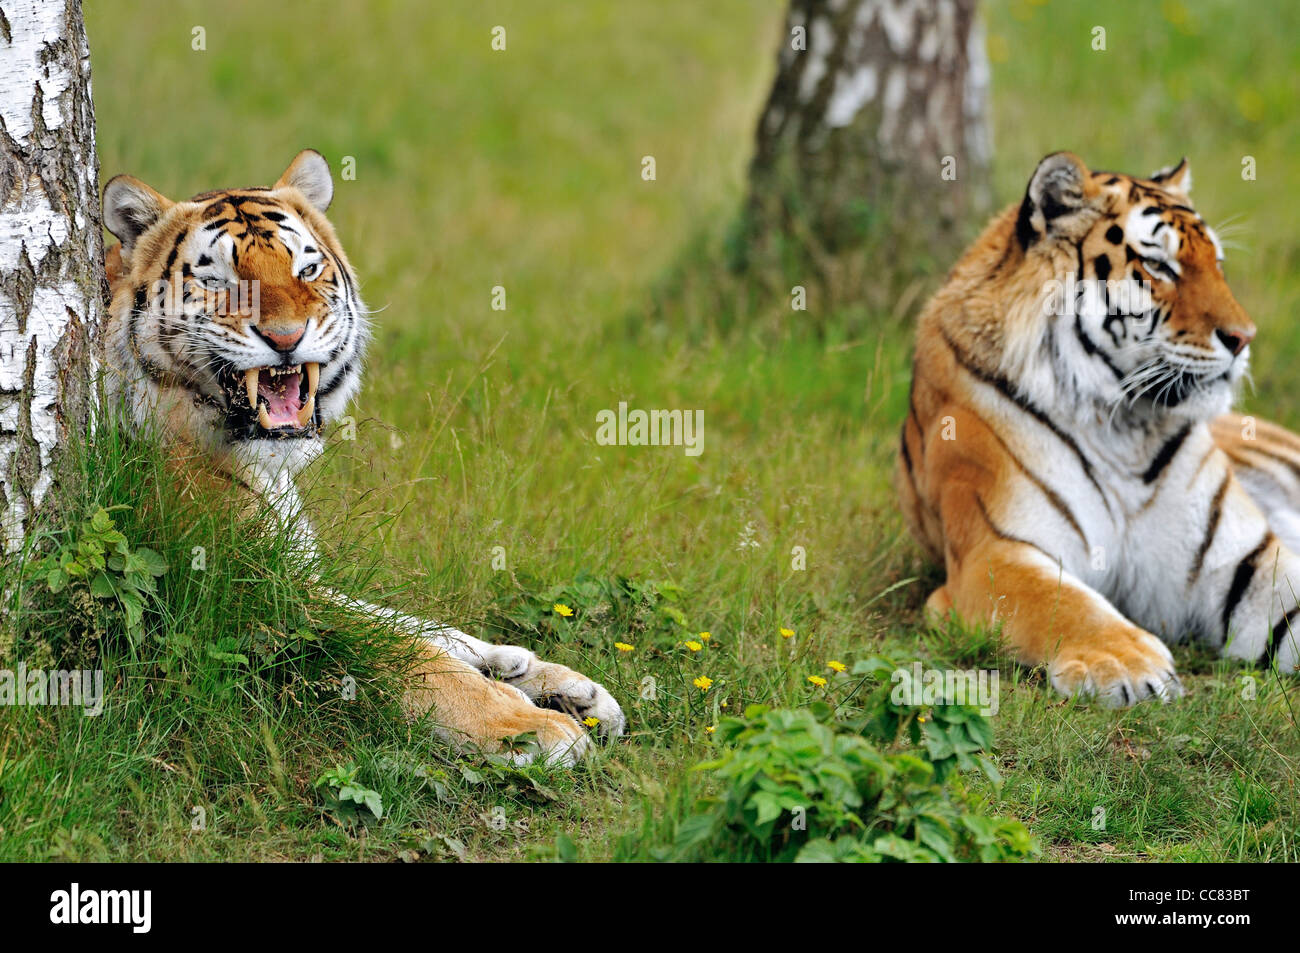 Two Siberian tigers / Amur tigers (Panthera tigris altaica) resting among trees, native to Russia and China Stock Photo